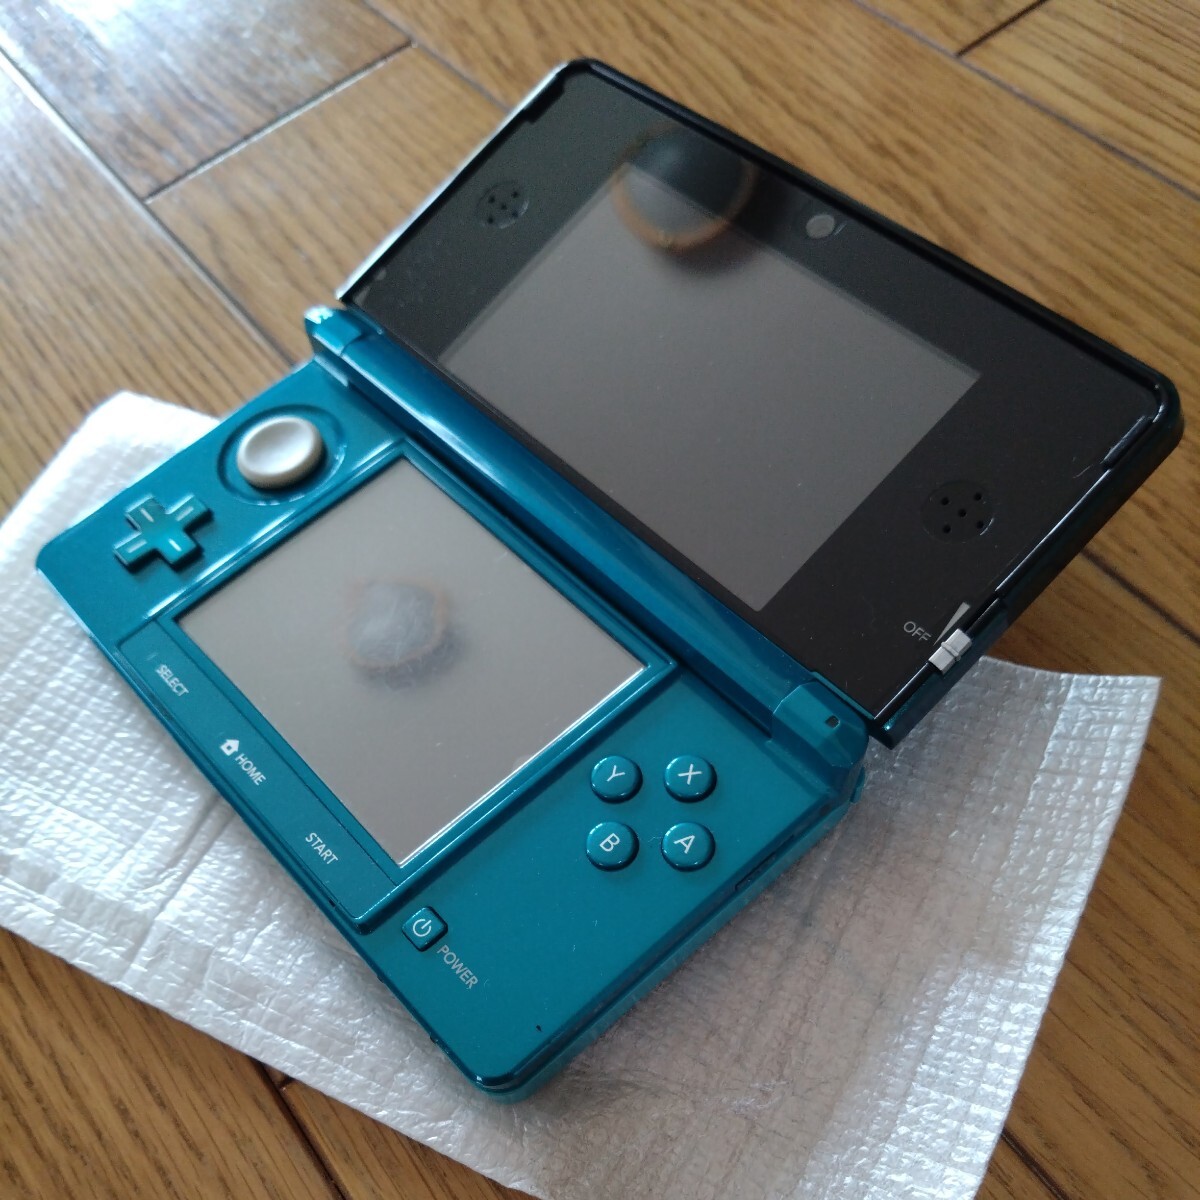 NINTENDO 3DS body aqua blue. operation verification settled Nintendo 3DS nintendo SD card attaching instructions the first period . settled set contents all part equipped 